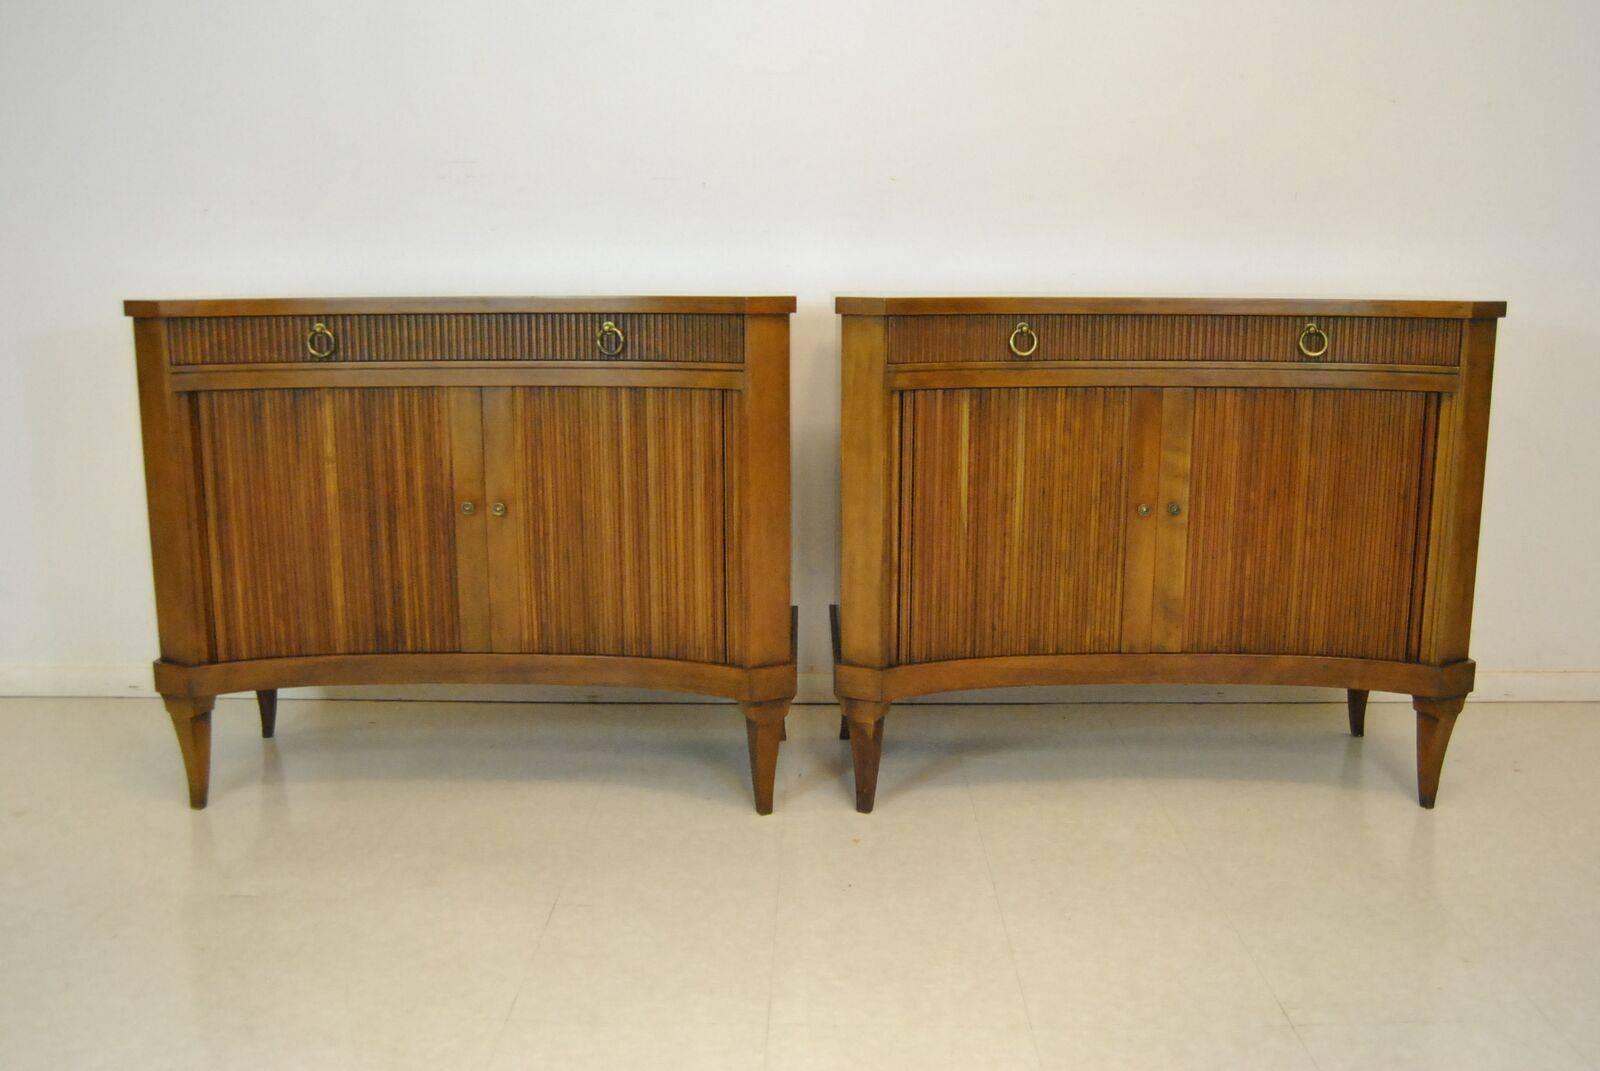 A very sought after pair of midcentury Regency style curved tambour door chests/commodes by Baker Furniture. These chests are made of solid fruit wood featuring a curved front with canted corners and tambour doors. They offer an interior bottom